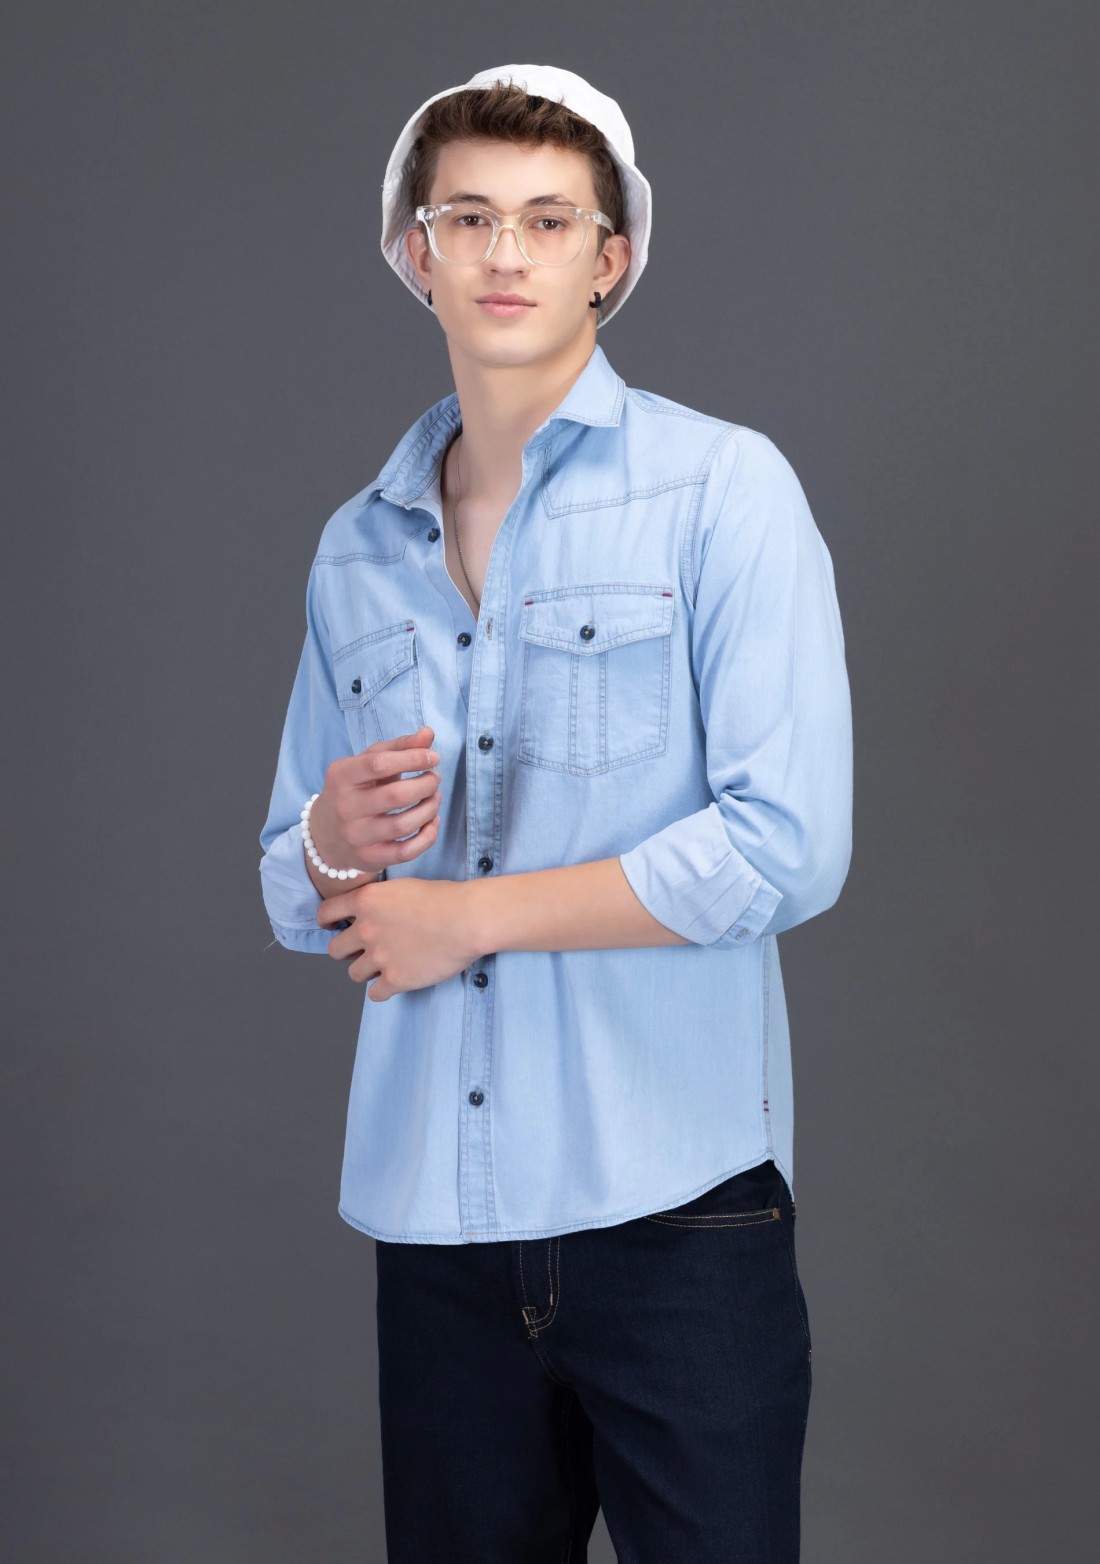 Paul Street Men Washed Casual Light Blue Shirt - Buy Paul Street Men Washed  Casual Light Blue Shirt Online at Best Prices in India | Flipkart.com